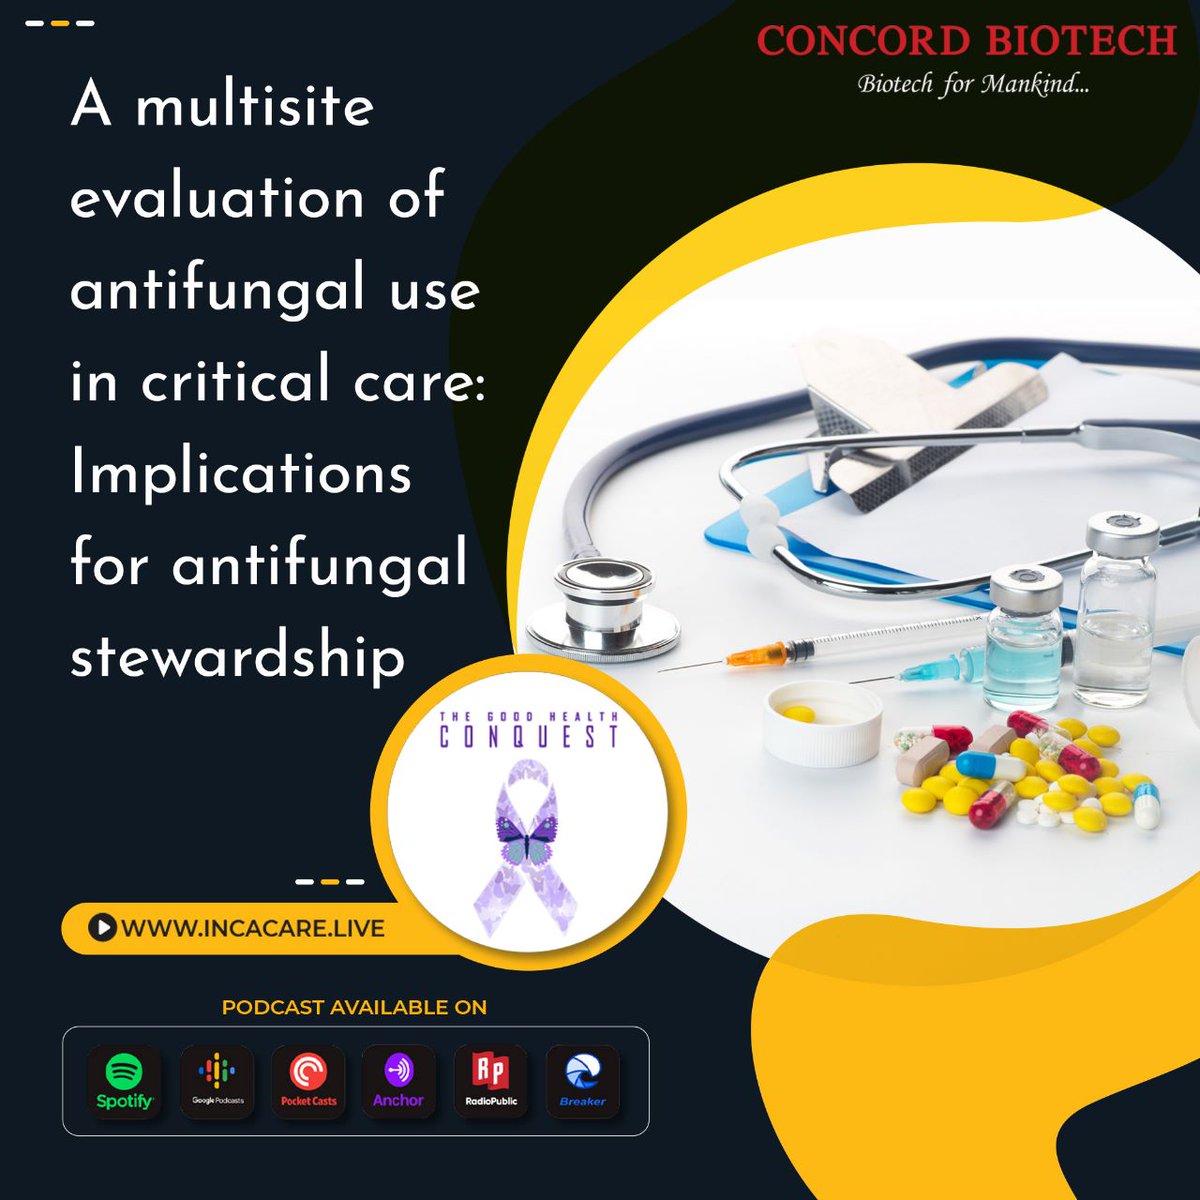 Join us on the #GoodHealthConquest as we delve into the evaluation of antifungal use in #criticalcare and explore the latest technologies revolutionizing microbial diagnoses in patients with #bacterialinfections and sepsis.

Tune in to our podcast - spotifyanchor-web.app.link/e/VJt4YvHtZyb